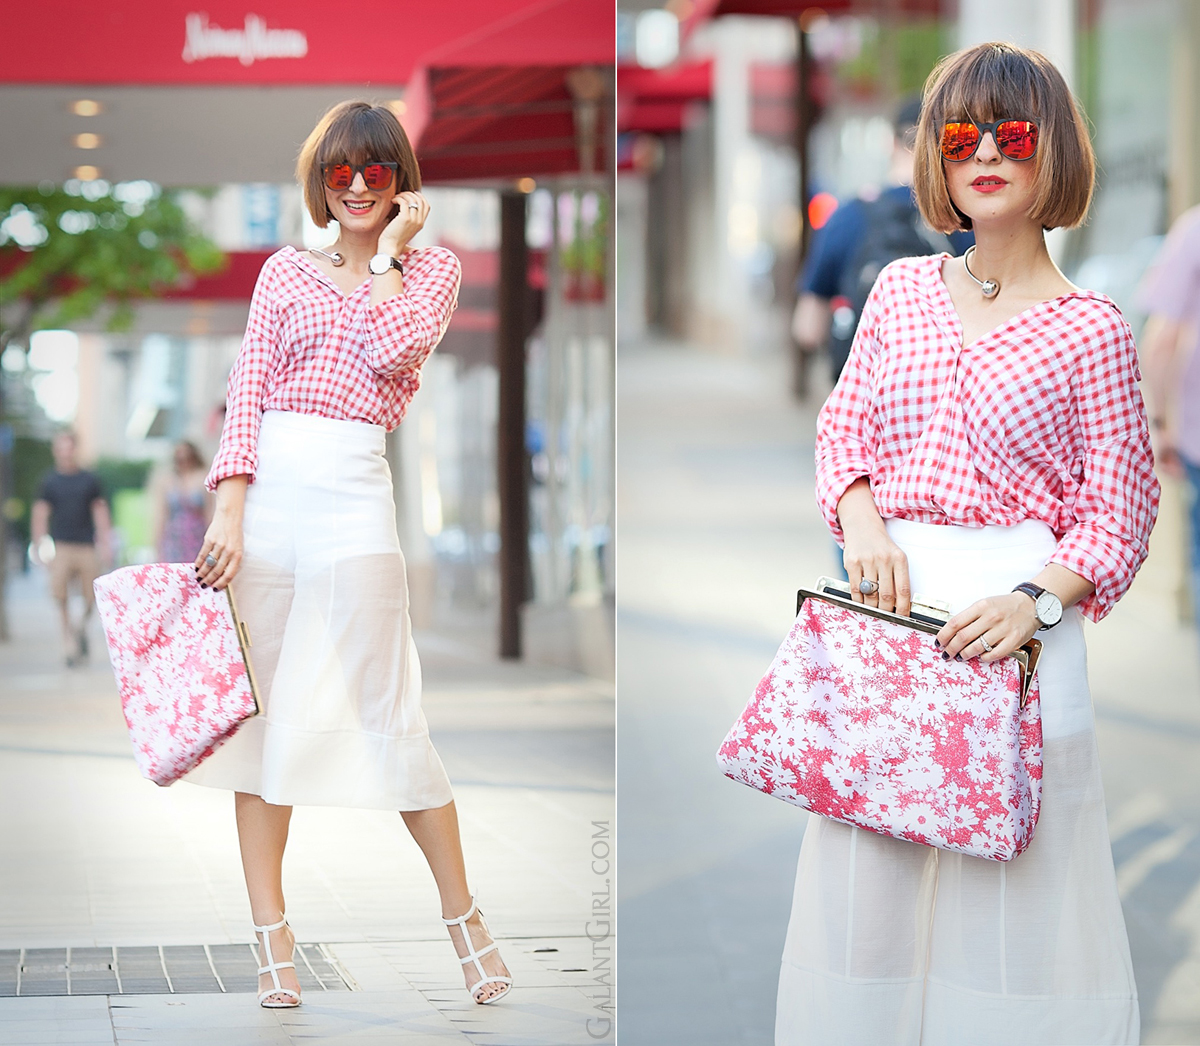 stella mccartney flower print clutch, stella mccartney clutch outfit, culottes outfit, gingham shirt outfit, galant girl, street style fashion, outfit for spring 2015,